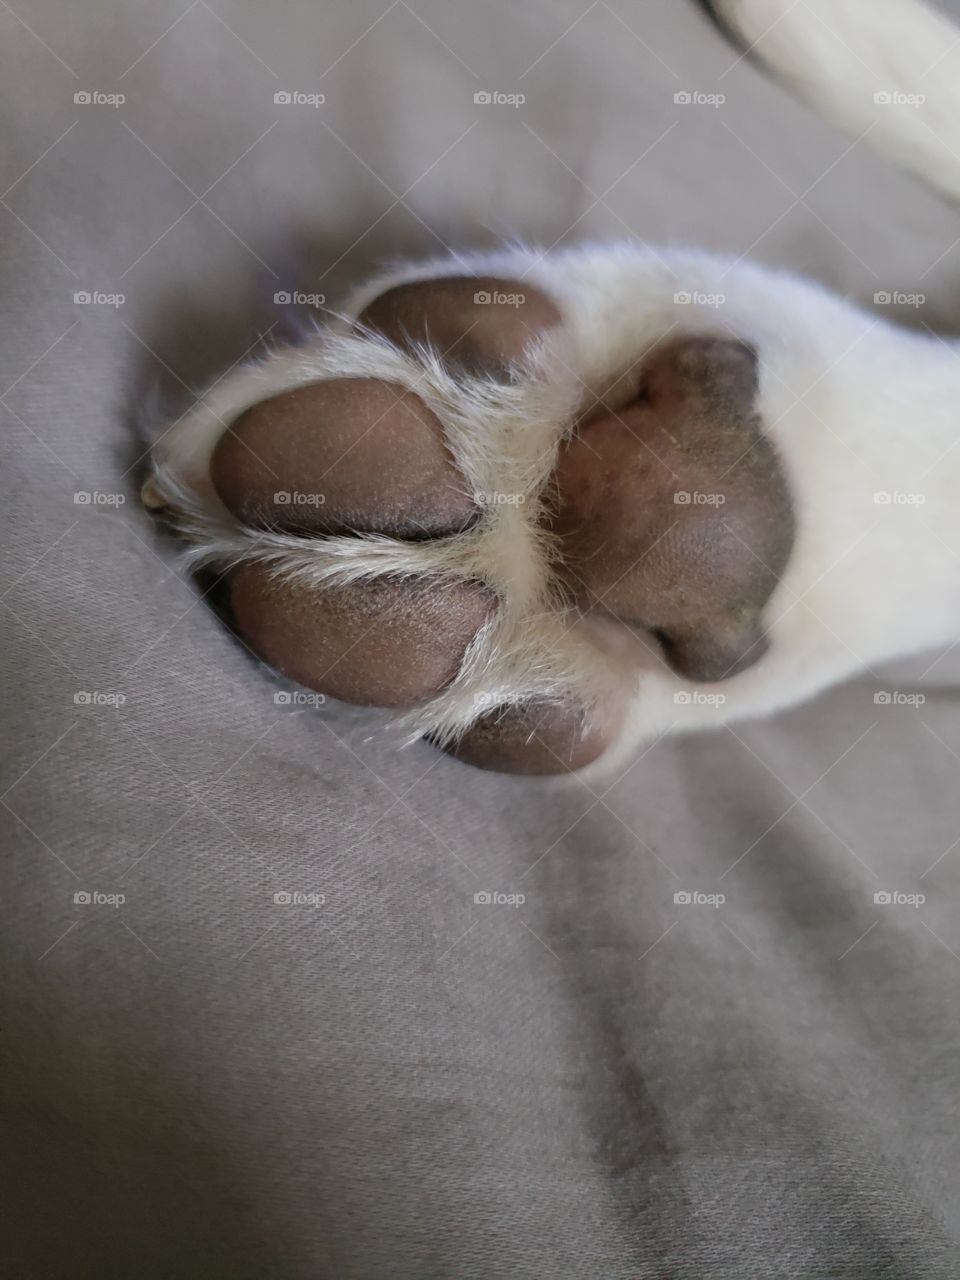 Who's paw is that?